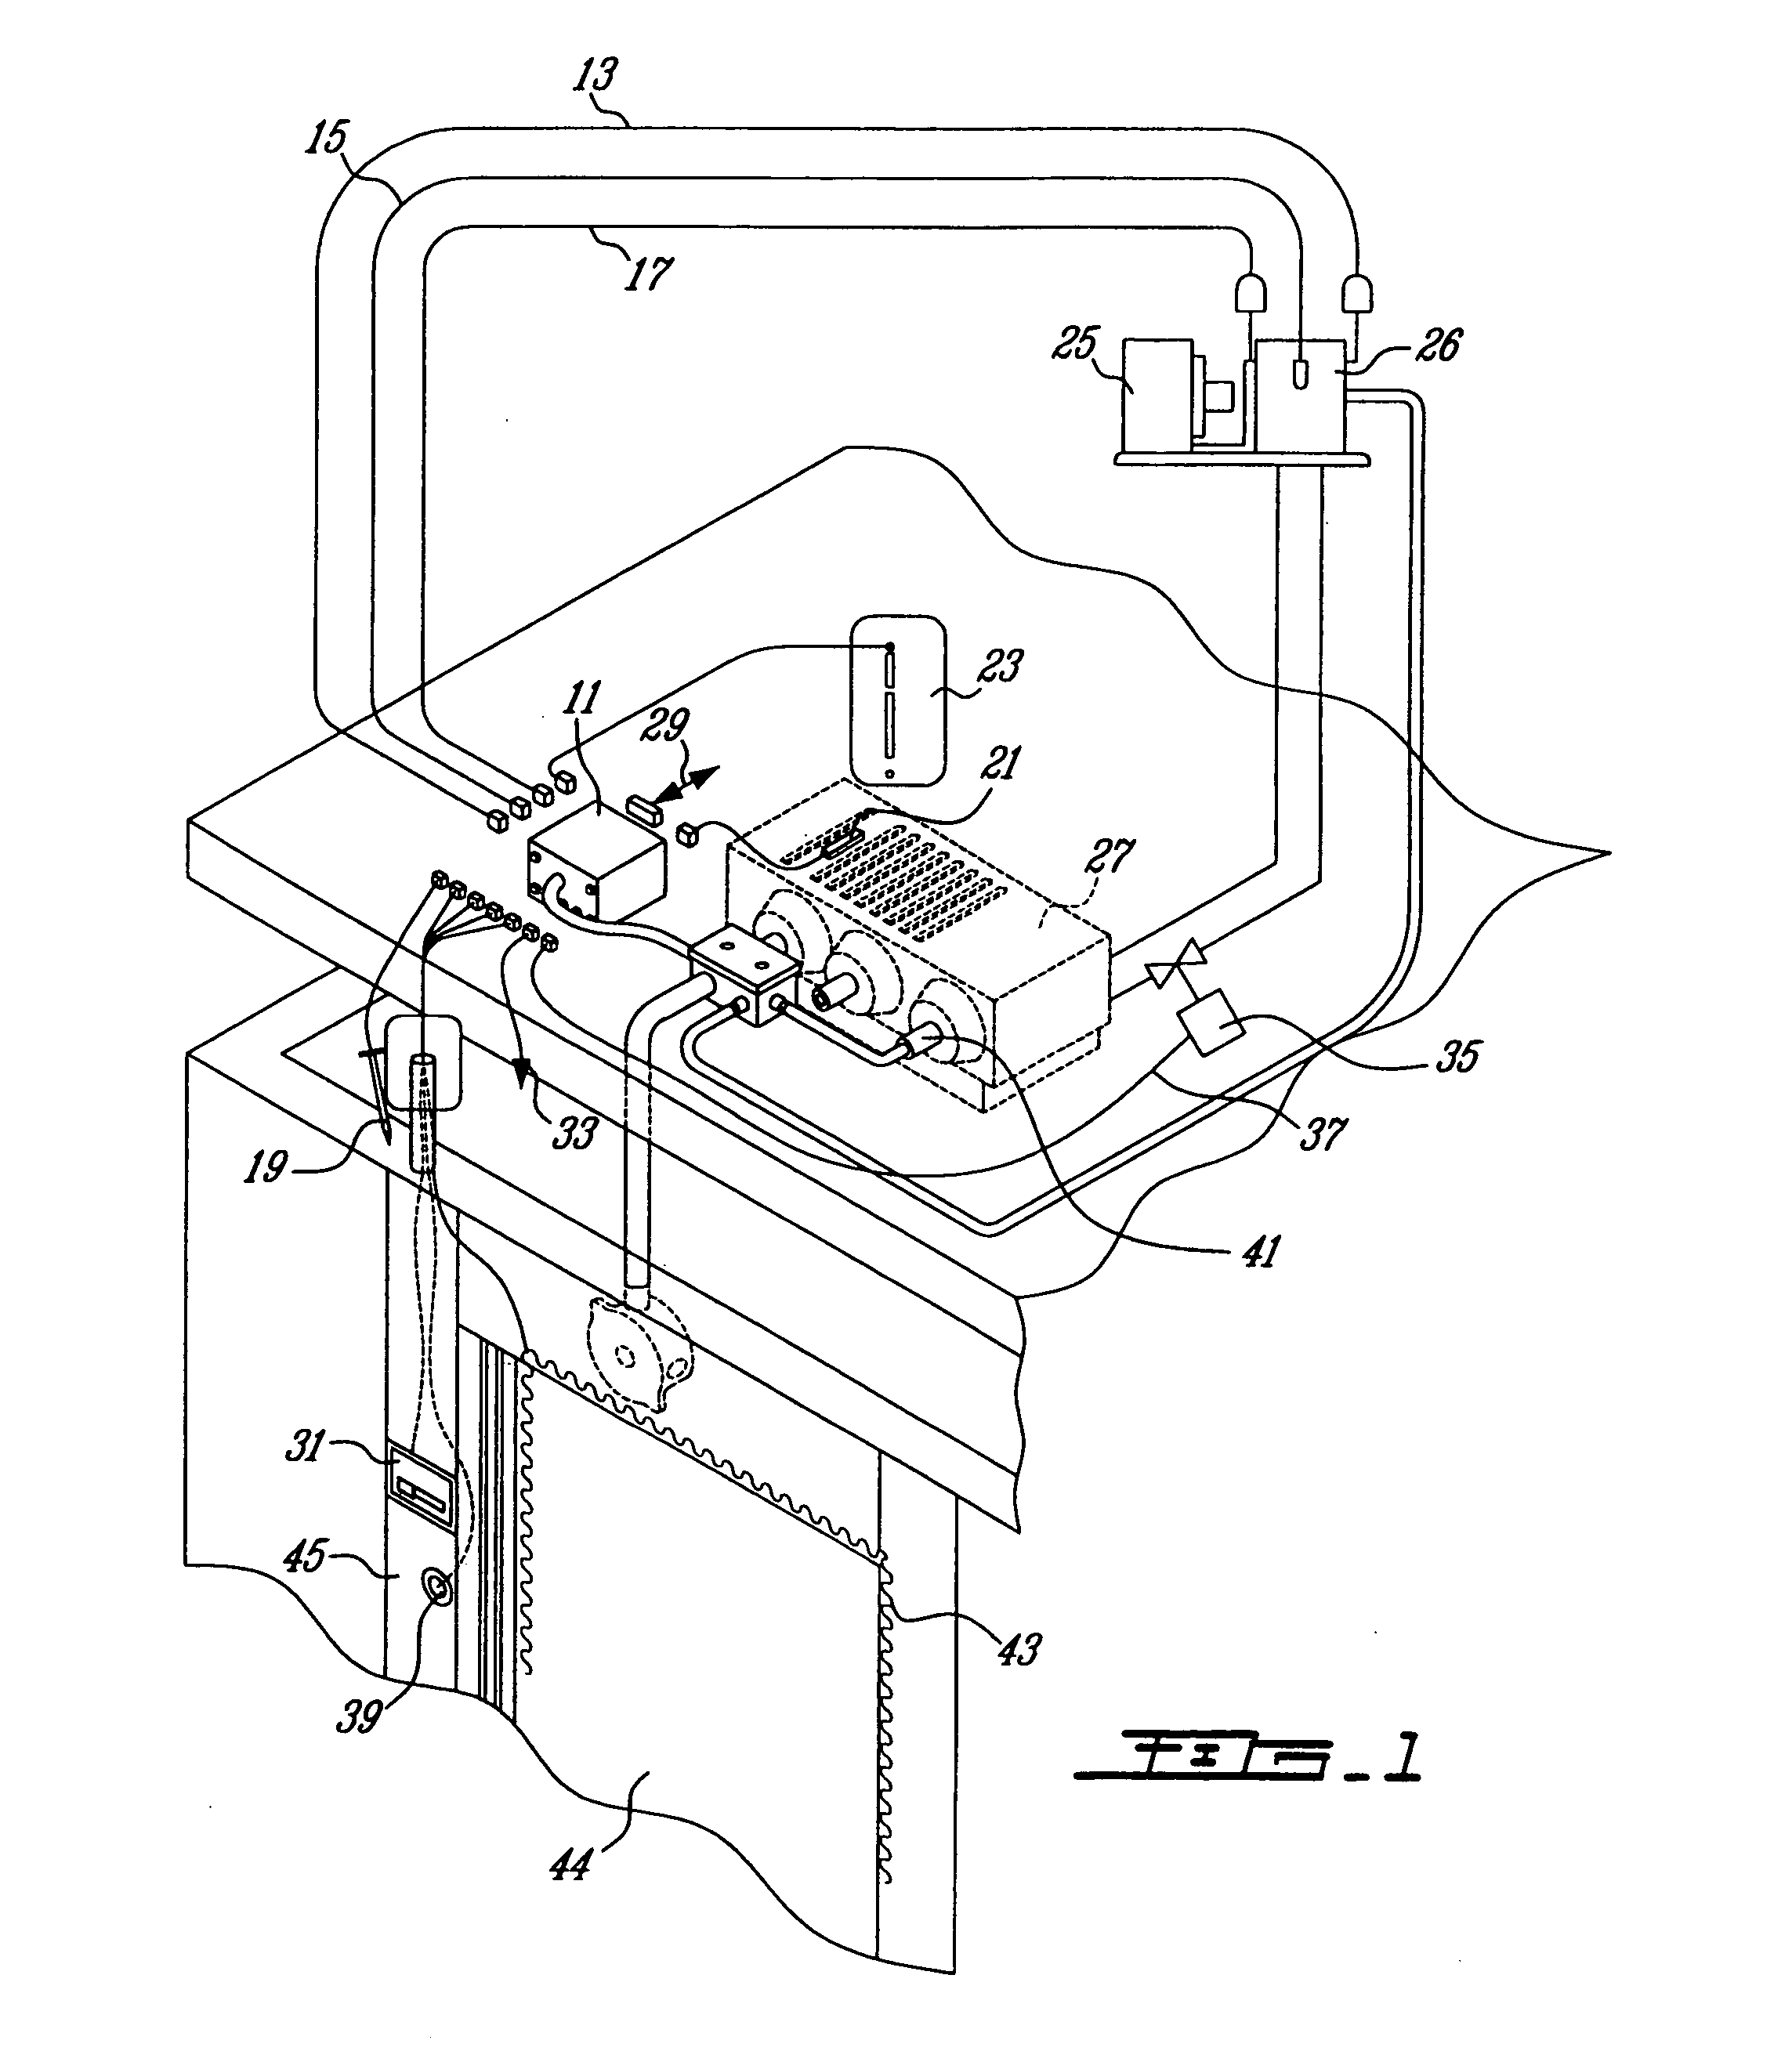 Walk-in refrigeration unit control and monitoring system